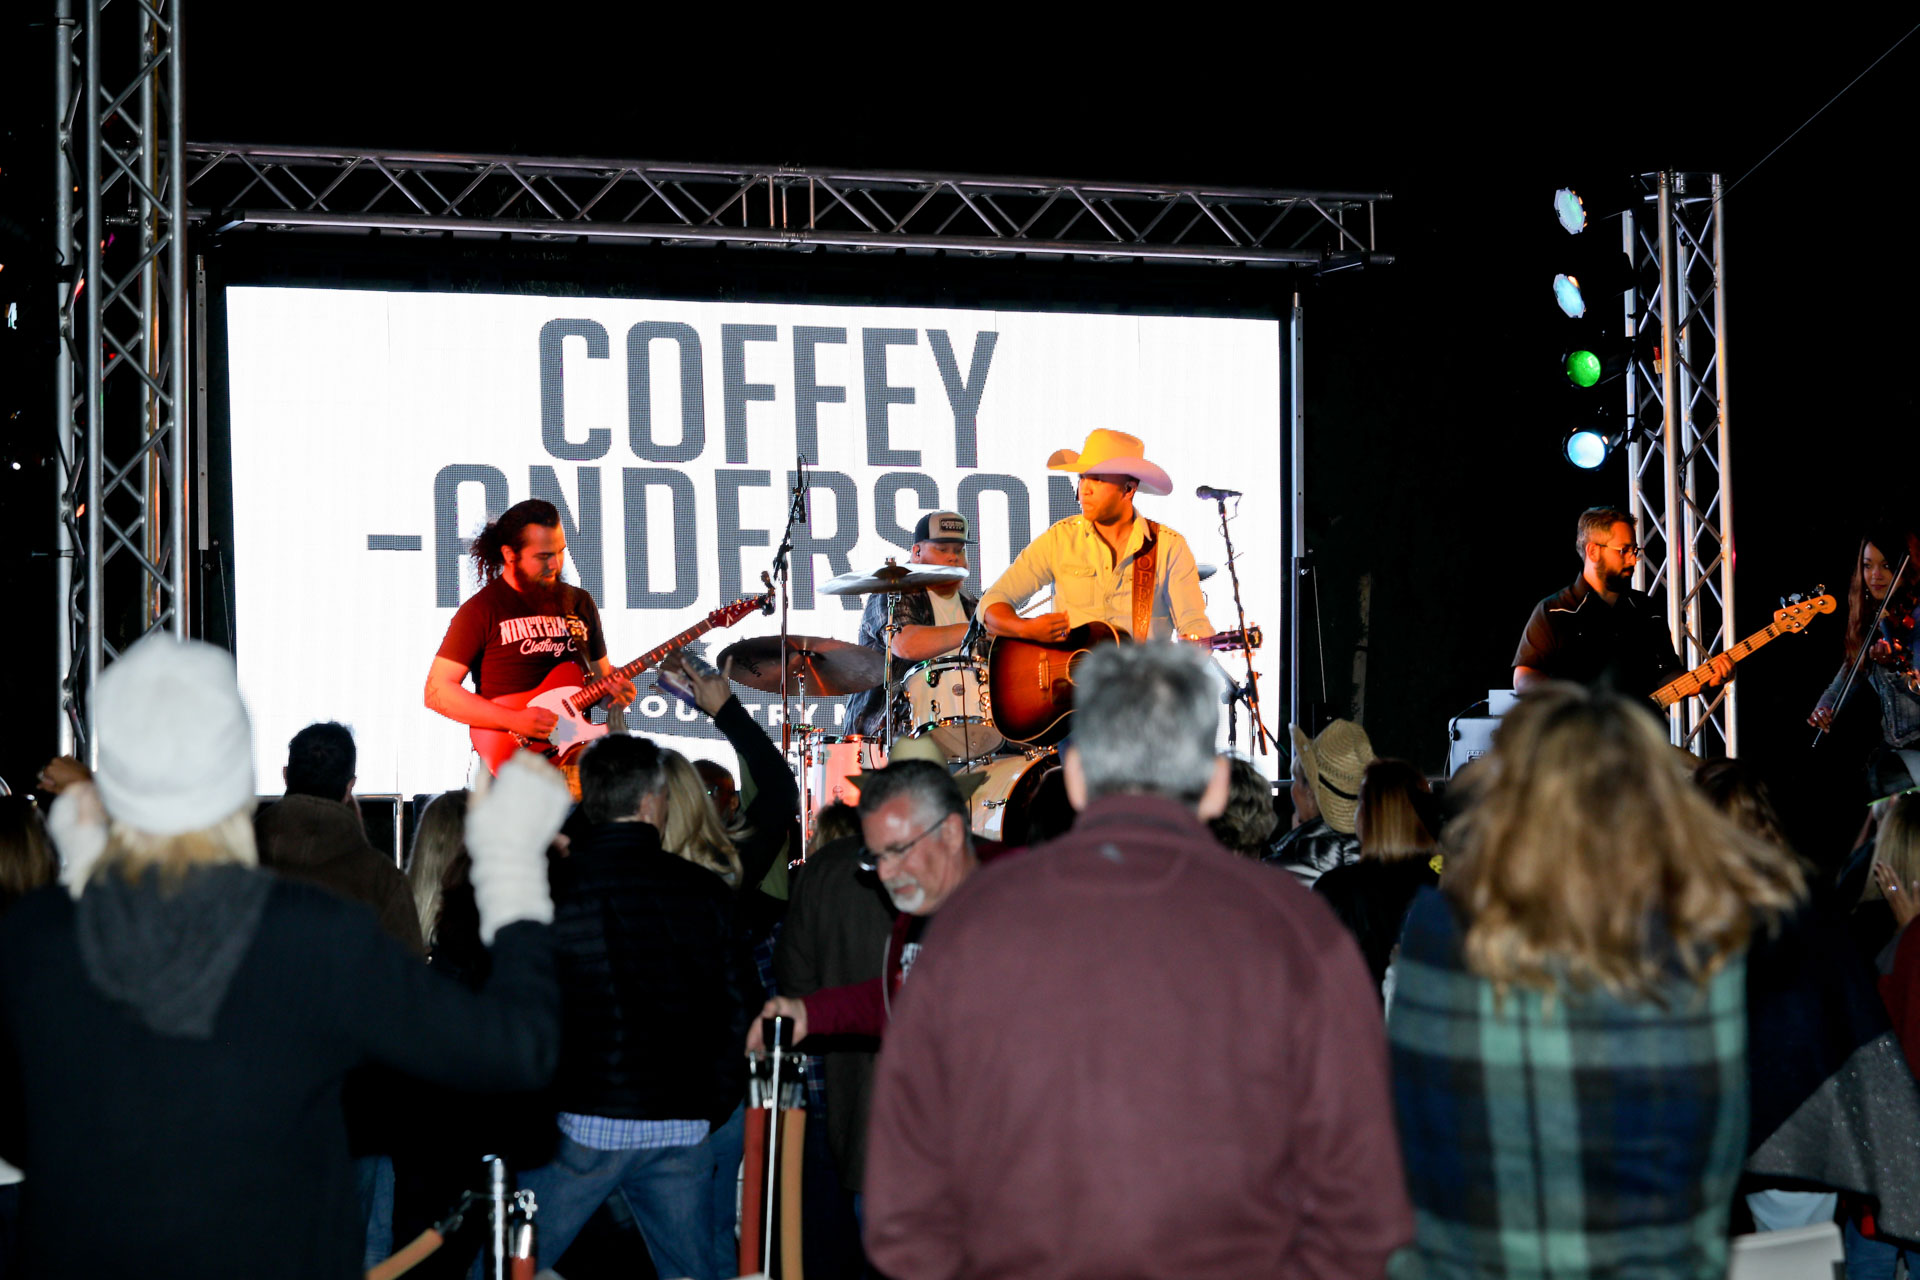 Country Fest with Coffey Andersen